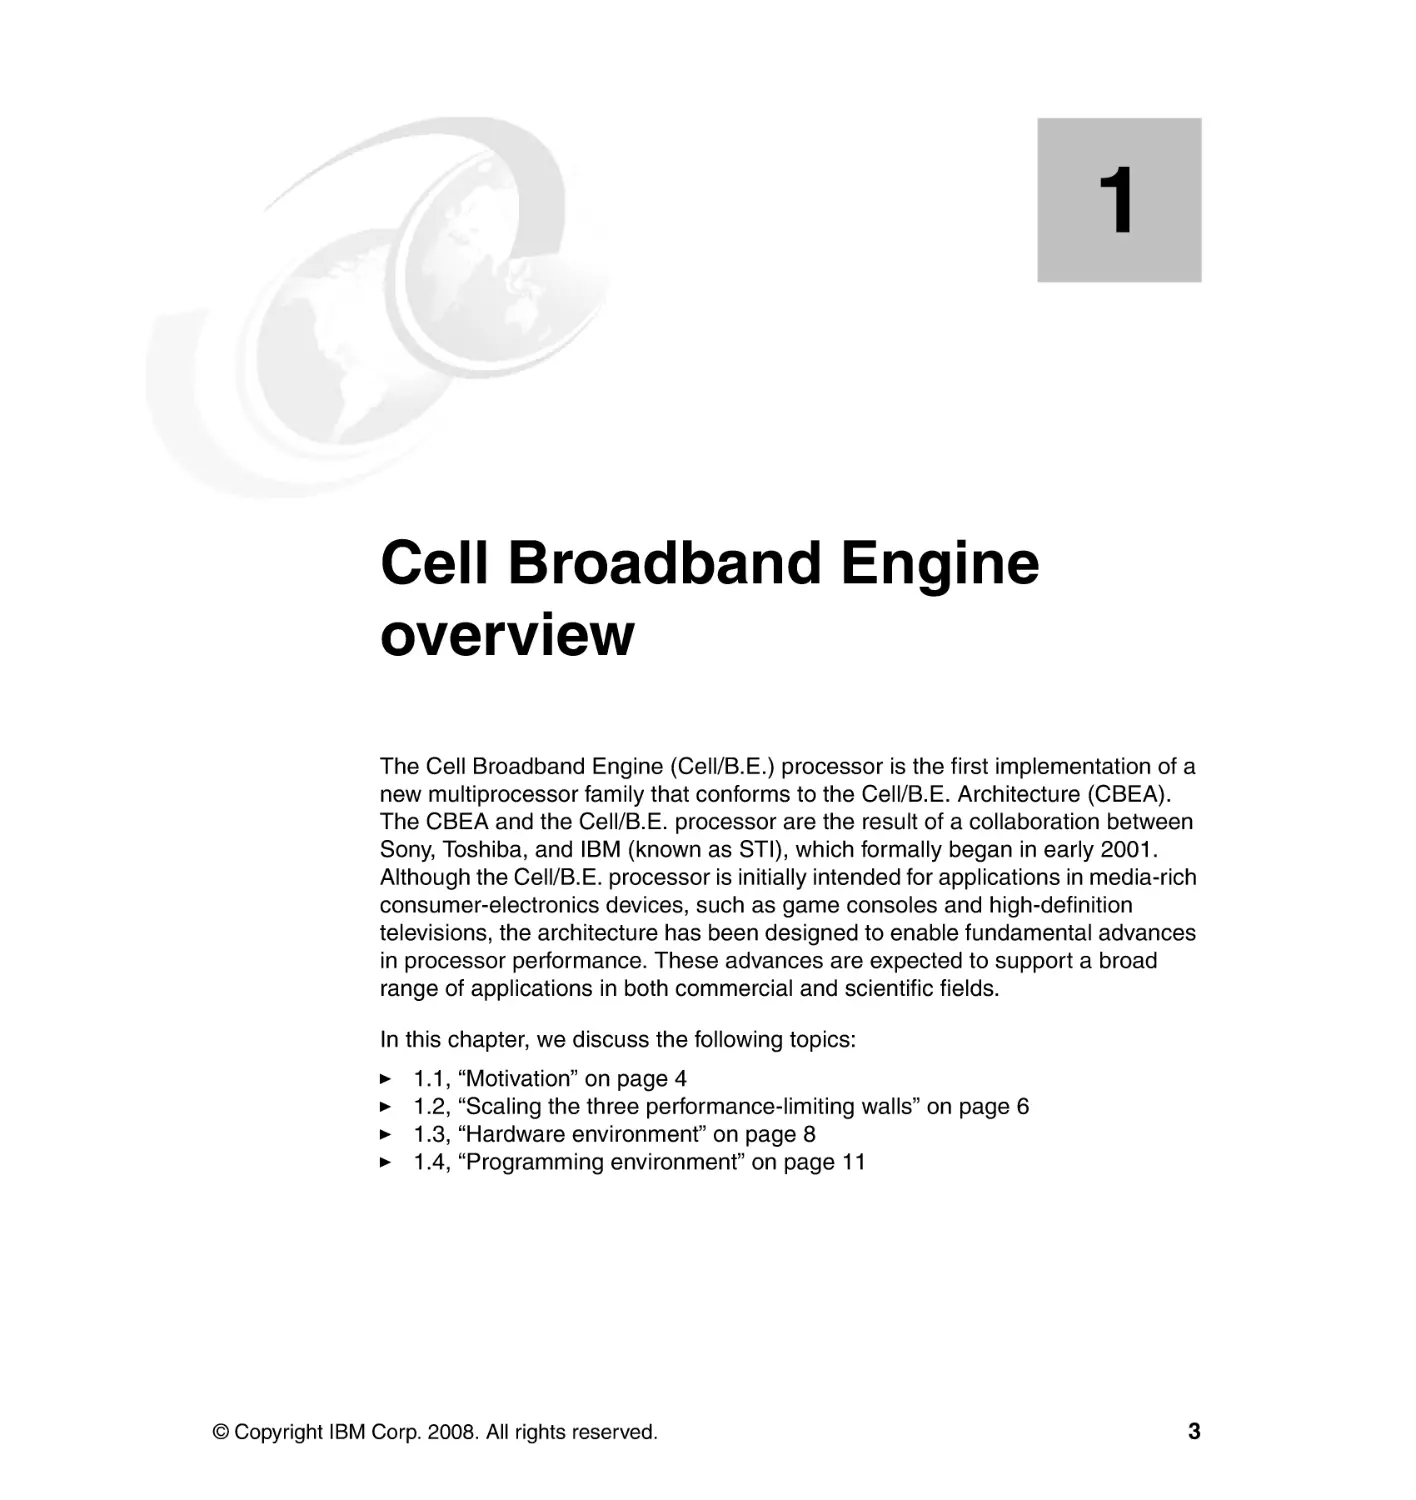 Chapter 1. Cell Broadband Engine overview